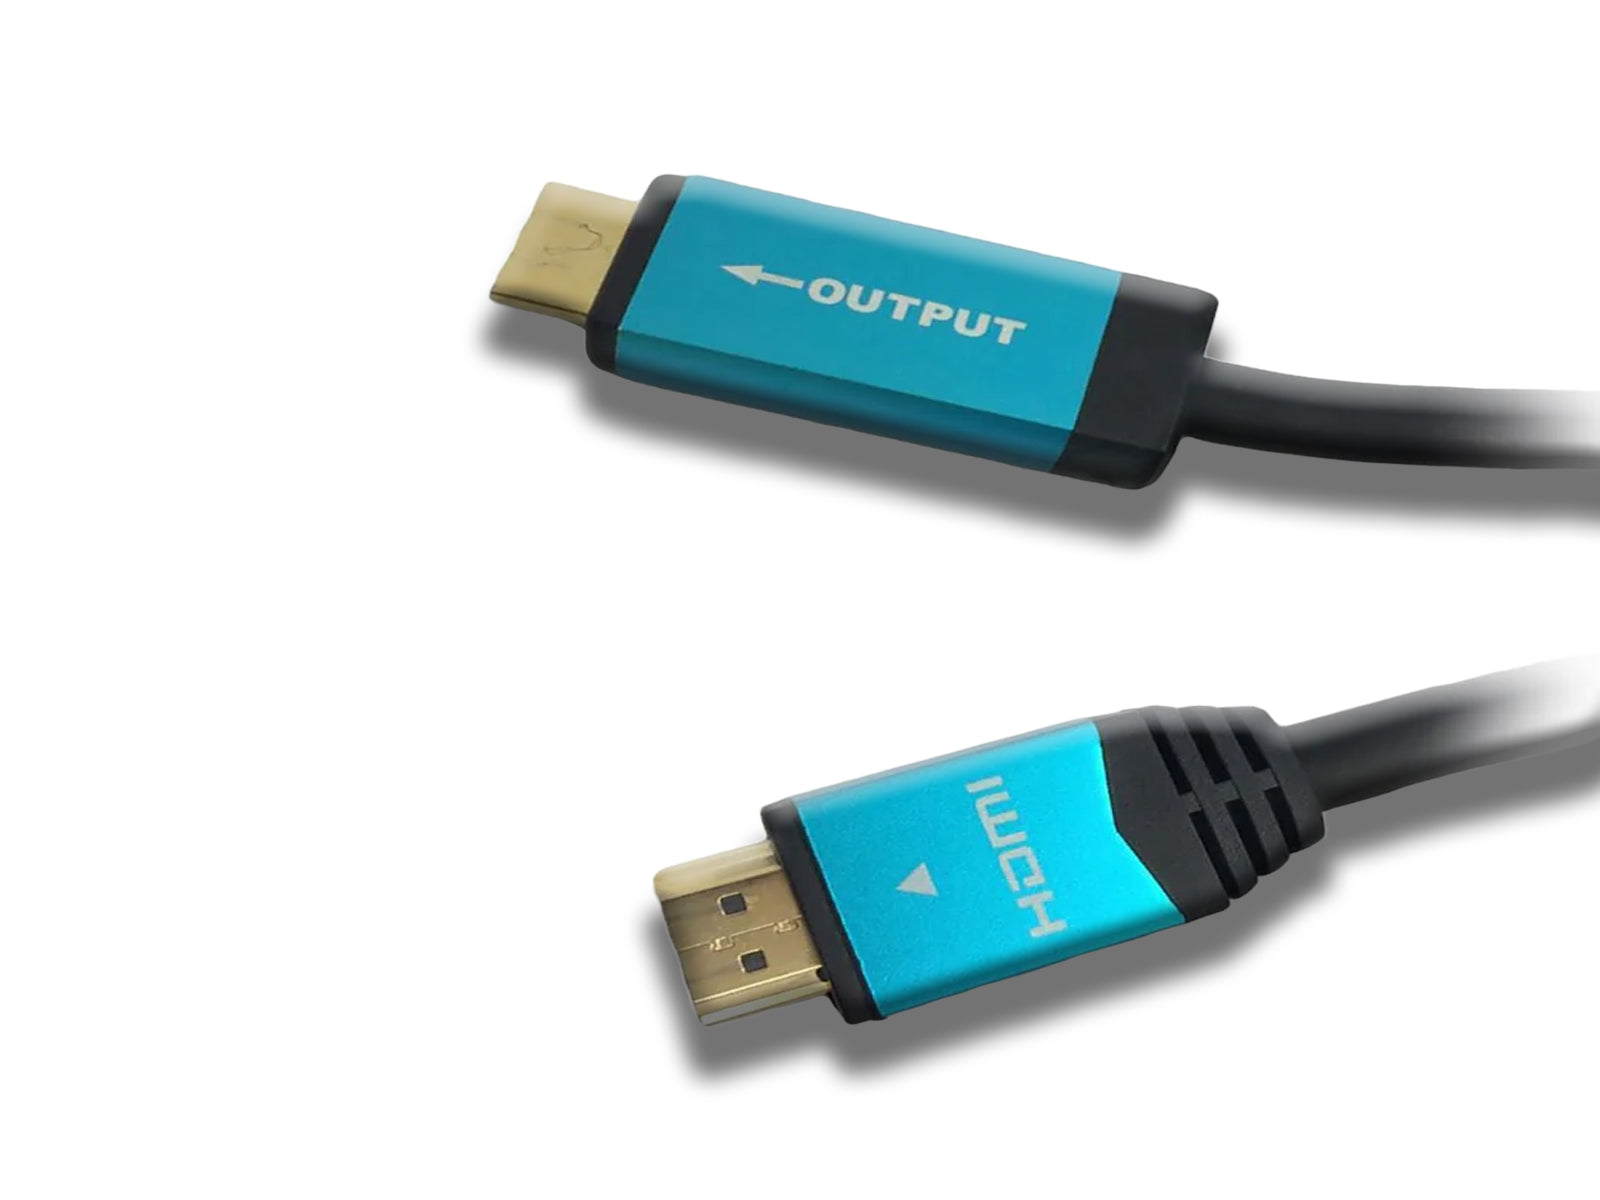 4K HDMI Cable High Speed Ultra High Definition Port View